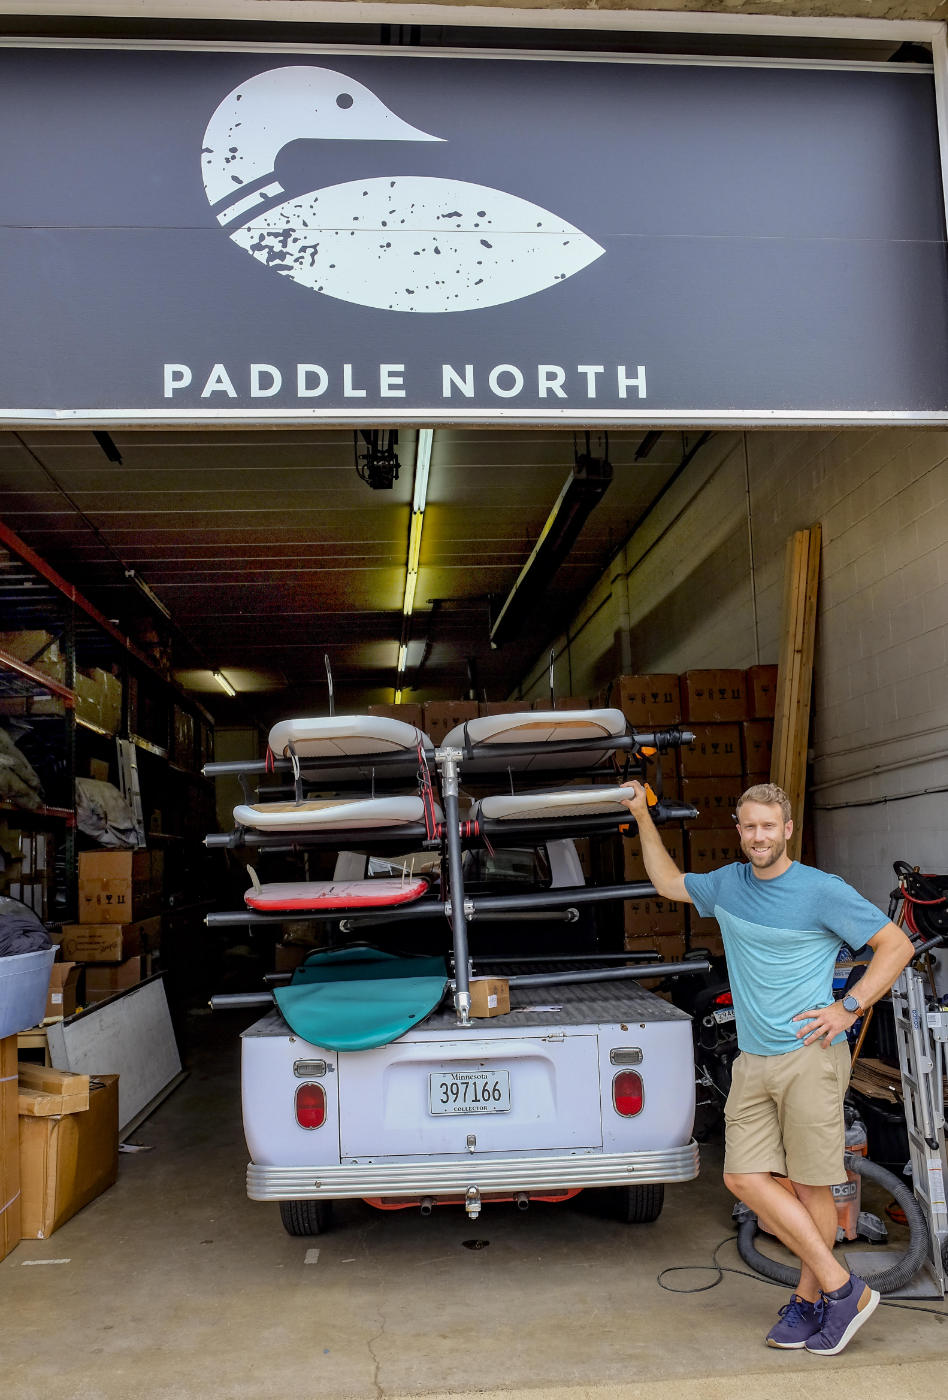 man in T-shirt and shorts leaning against back of a small truck carrying six paddleboards on a rack, in a garage port with a painted sign on top with PADDLE NORTH and loon logo